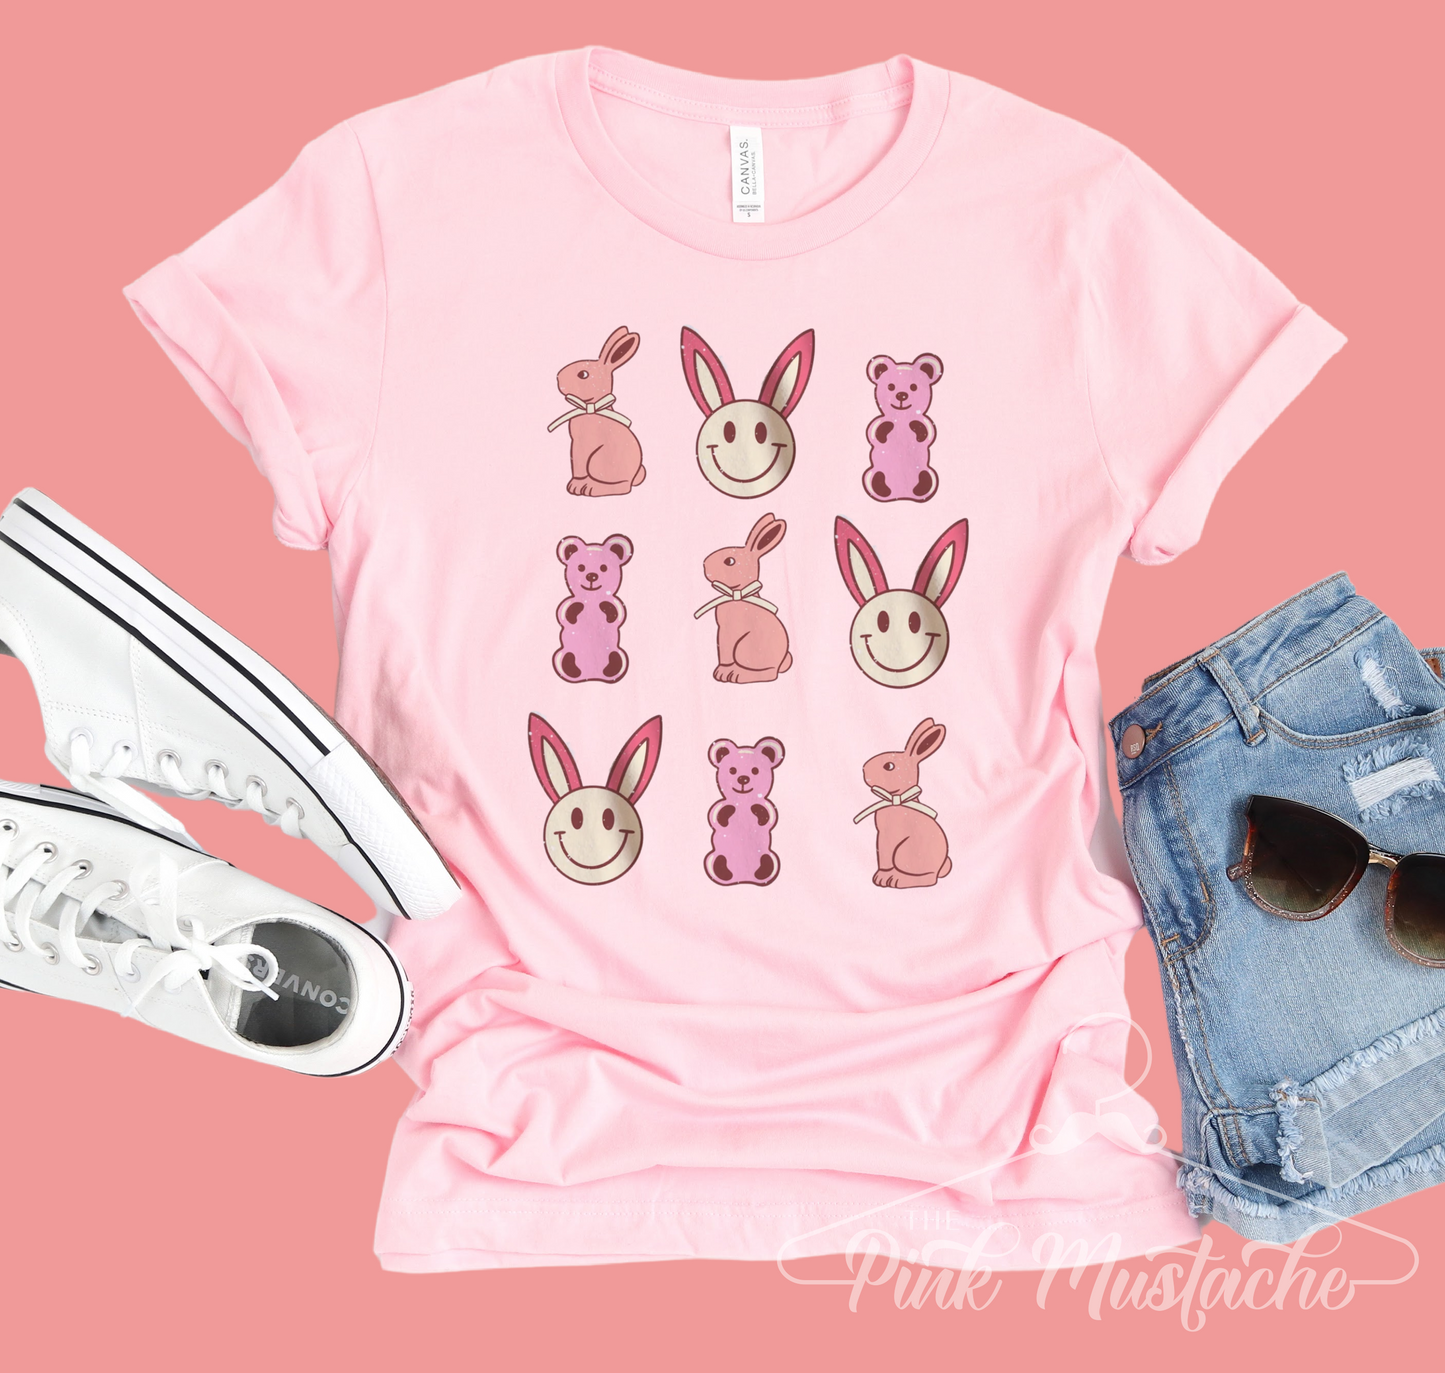 Easter Softstyle Bunny Tee/Bella Canvas Easter Bunny Shirt/ Toddler, Youth and Adult Sizes Available